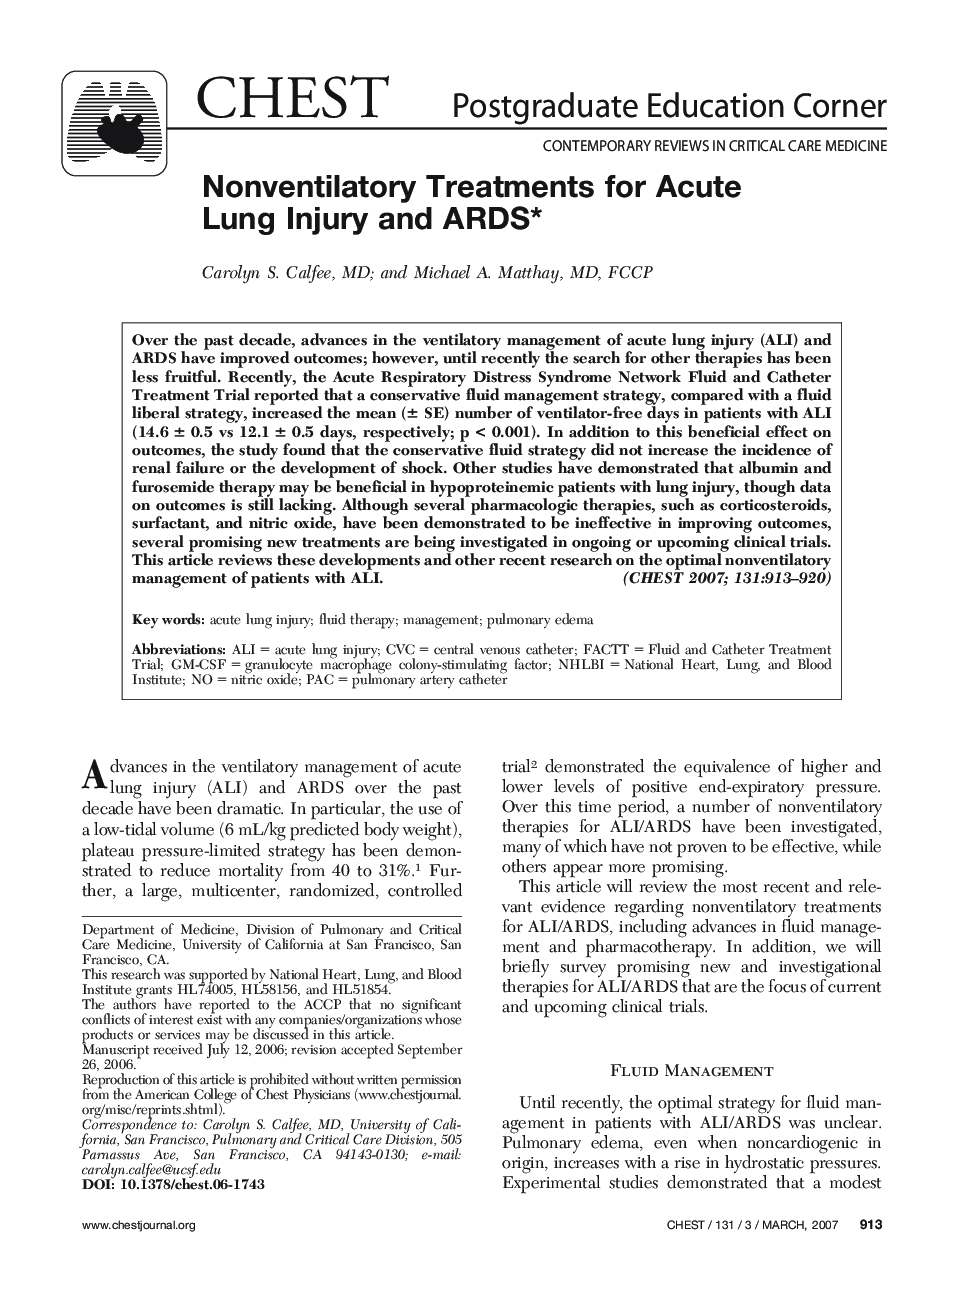 Nonventilatory Treatments for Acute Lung Injury and ARDS 